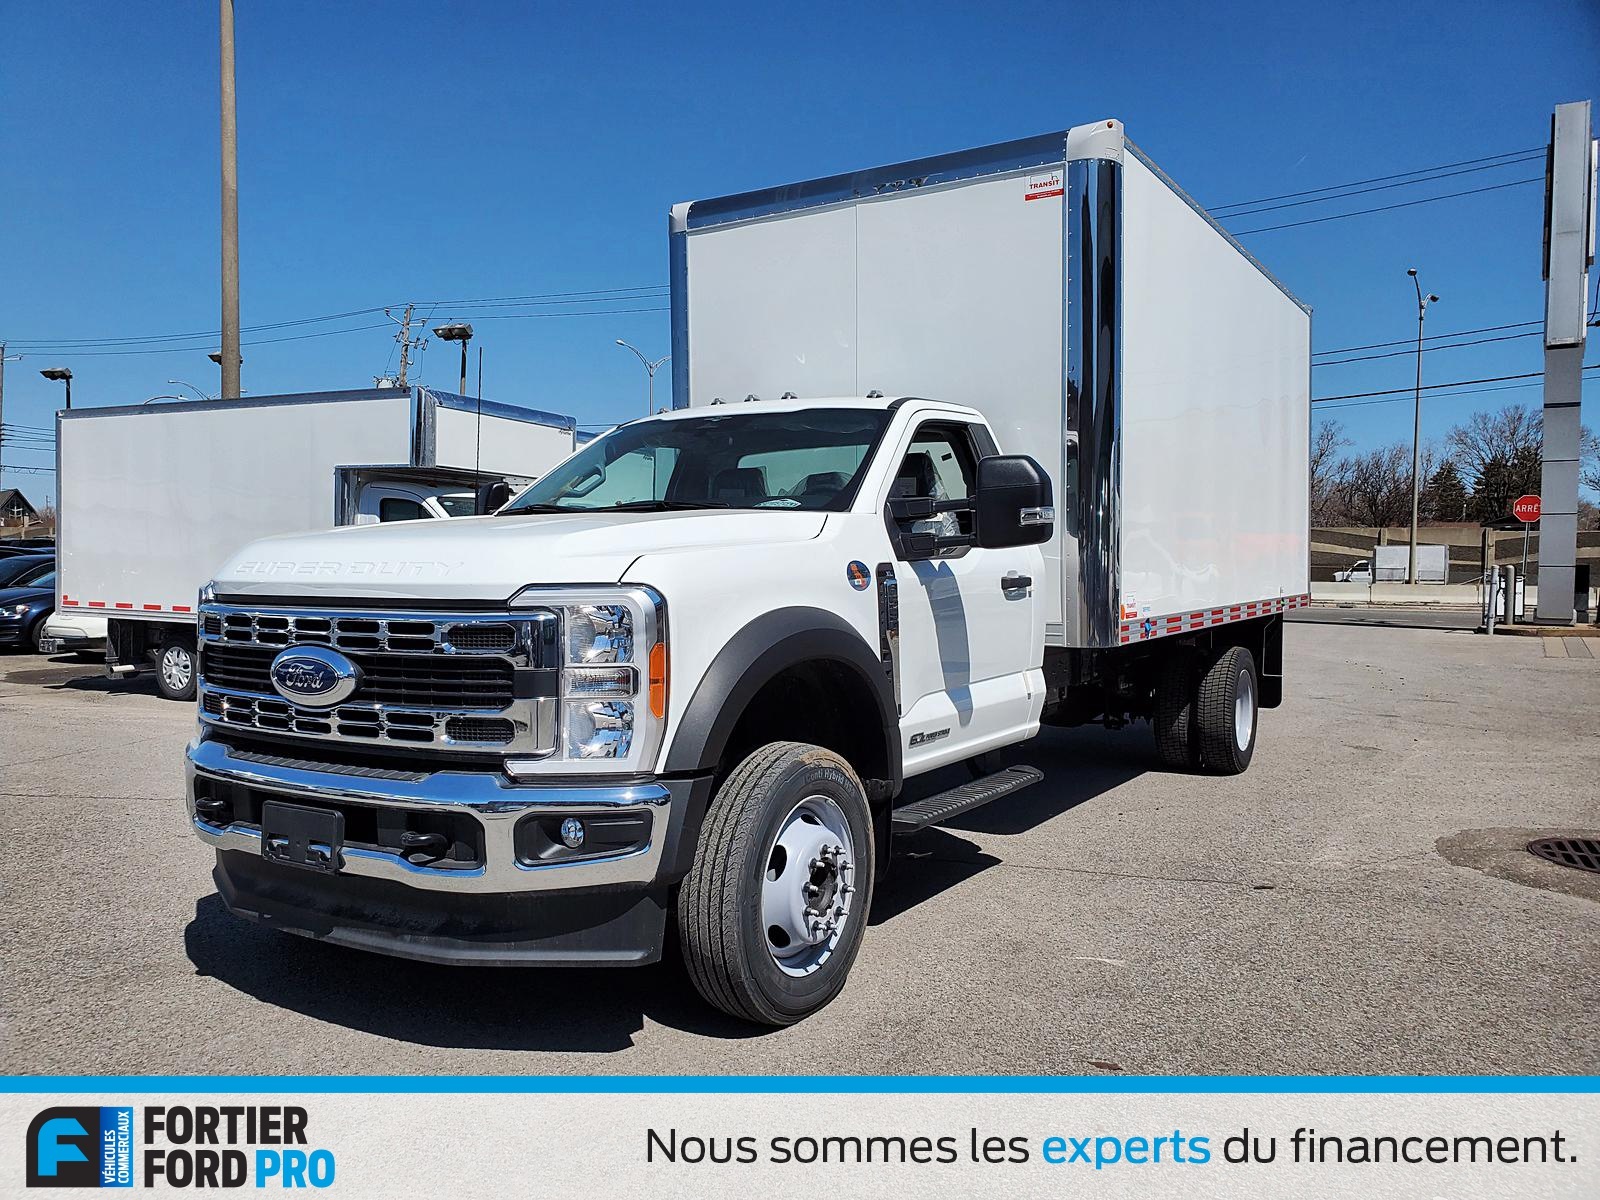 2023 Ford F-550 XL CUBE 16CABINE SIMPLE 2RM 205 DCE 120 V8 6.7